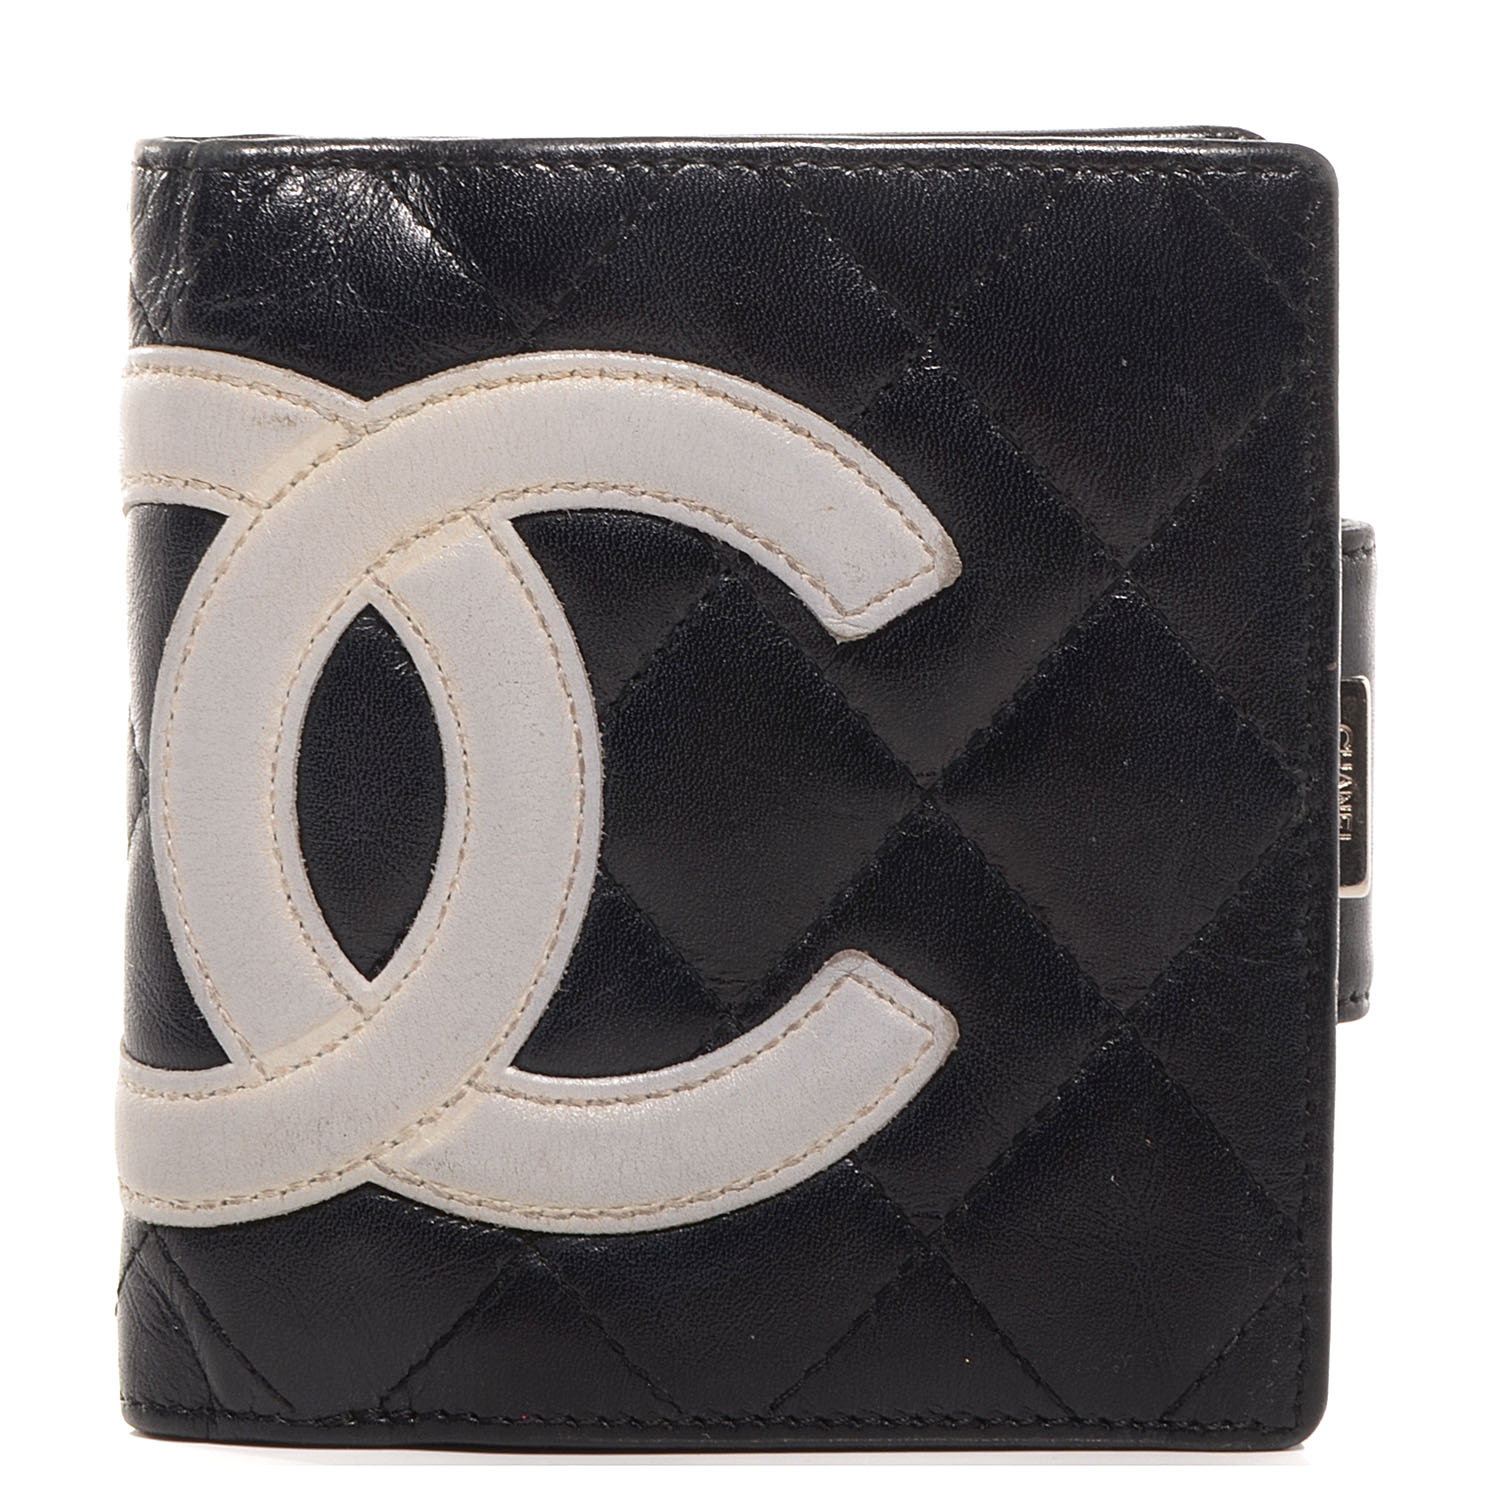 CHANEL Calfskin Quilted Cambon Bi-fold Wallet Black White 75650